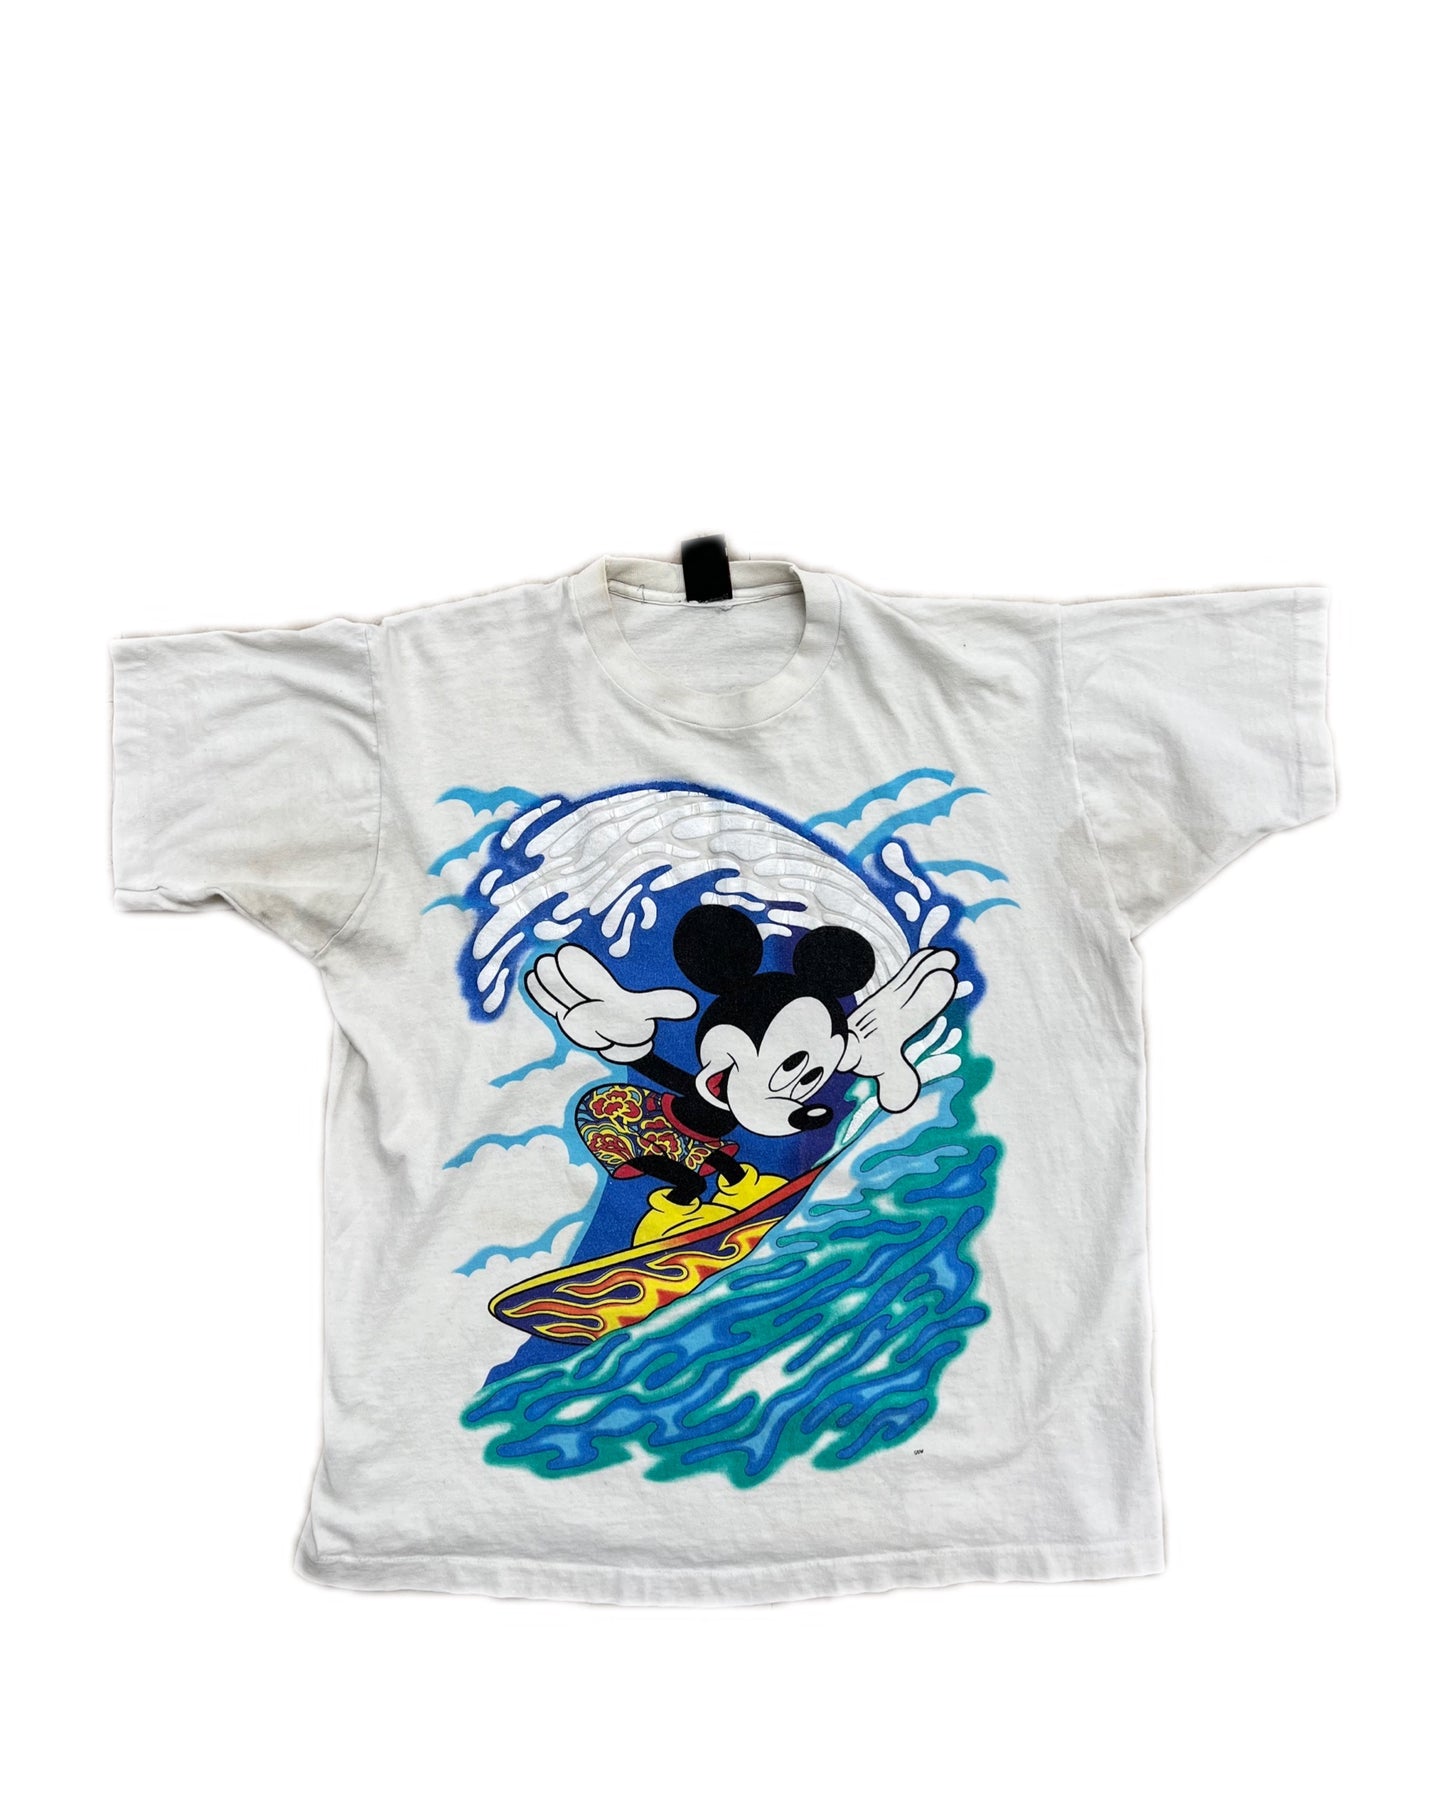 Mikey Mouse Surfing Vintage Tee White